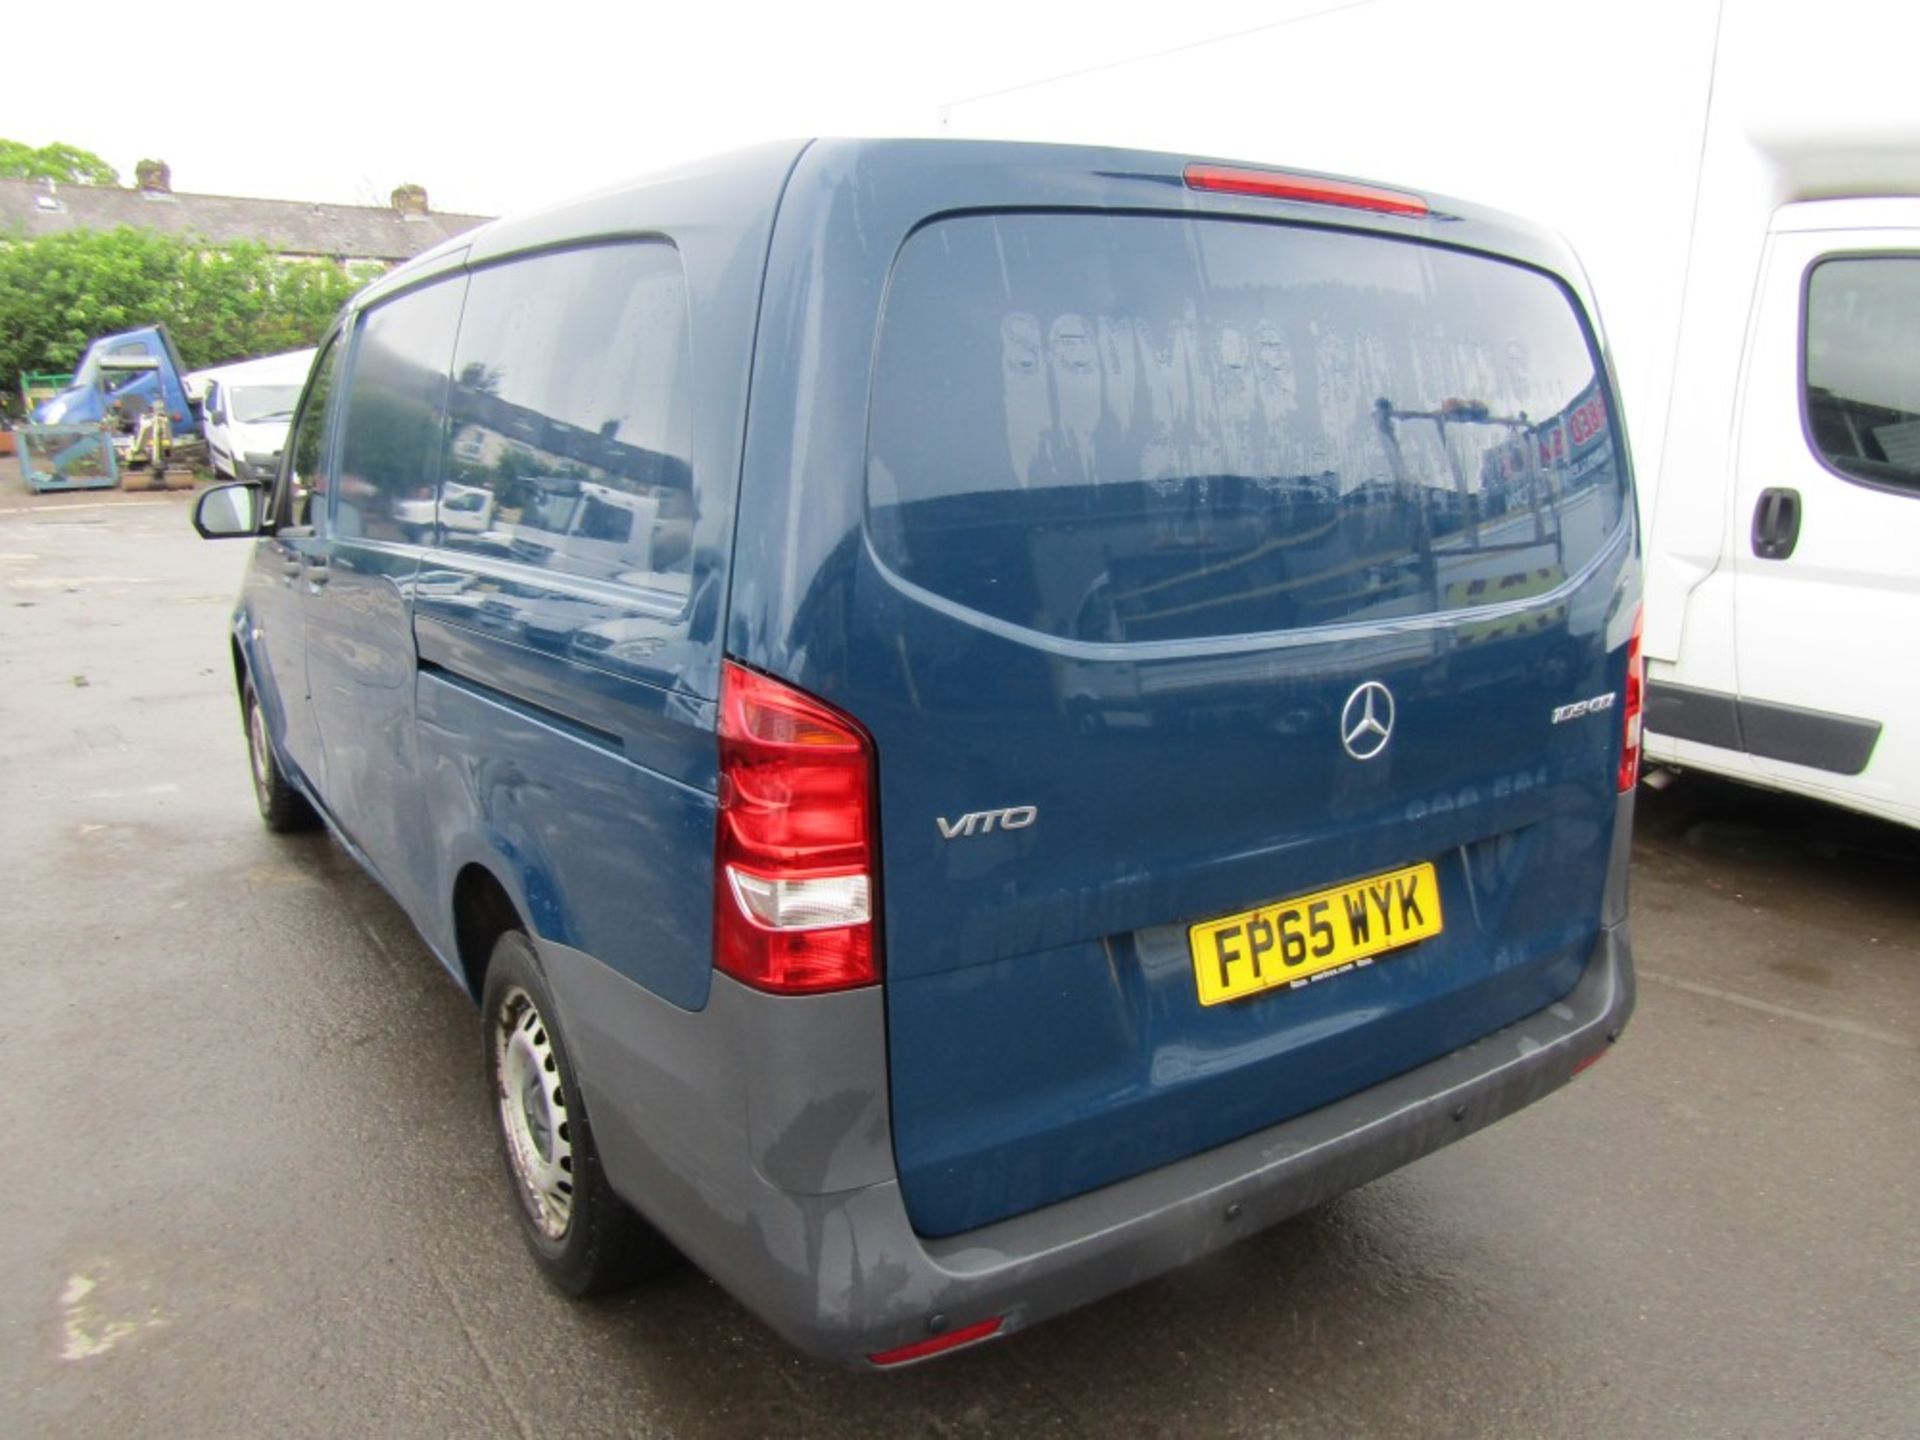 65 reg MERCEDES VITO 109 CDI, 1ST REG 12/15, TEST 12/22, 257794M, V5 HERE, 2 FORMER KEEPERS [NO - Image 3 of 7